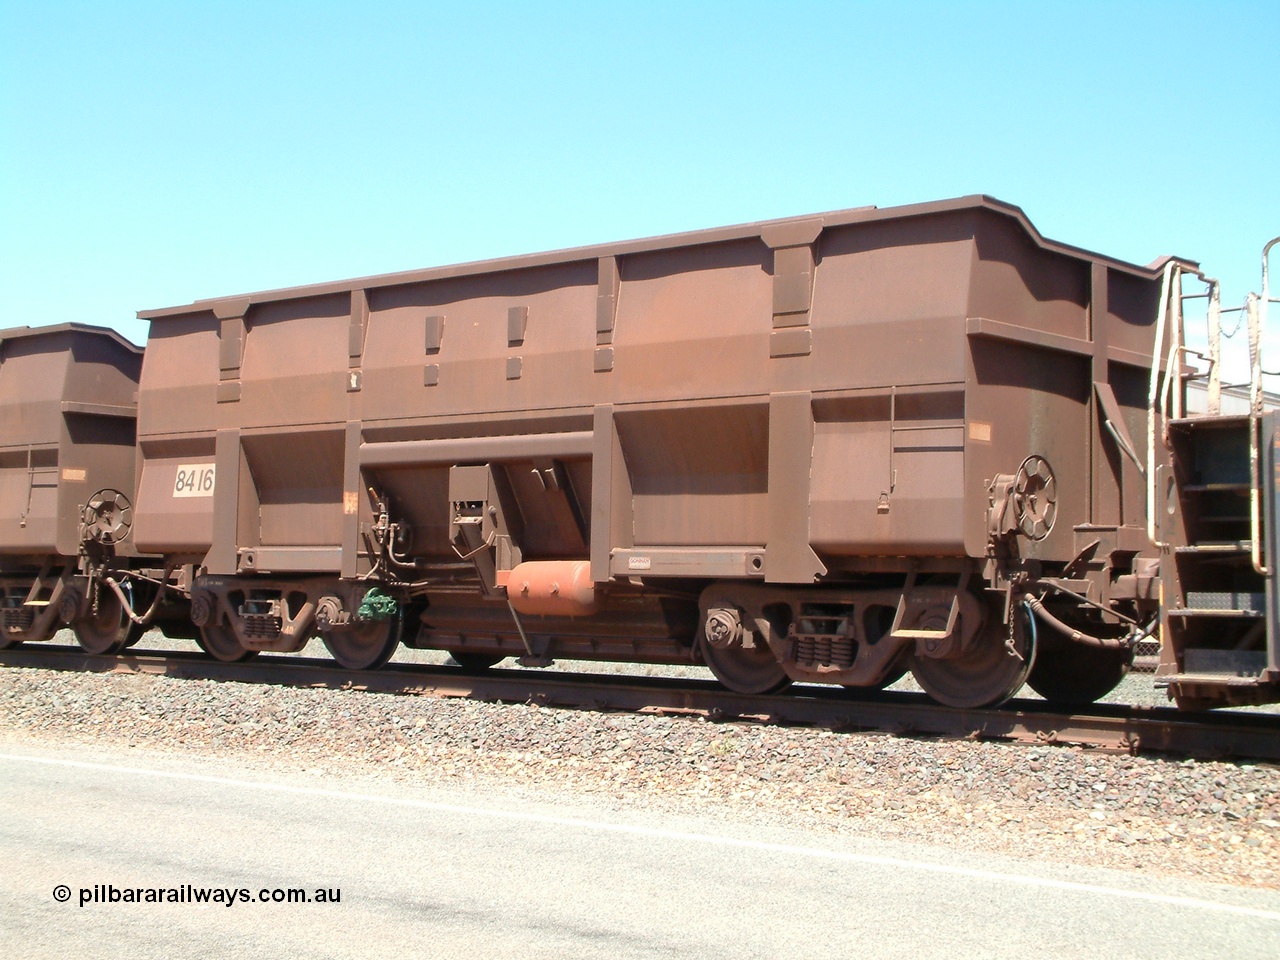 040409 121920
Boodarie, Goninan built Golynx waggon 8416 with serial number 950088-326 from November 2011, which is a modified version of the BHP mainline waggons for service on the Goldsworthy system as a bottom discharge waggon. 9th of April 2004.
Keywords: 8416;Goninan-WA;Golynx;950088-326;BHP-ore-waggon;